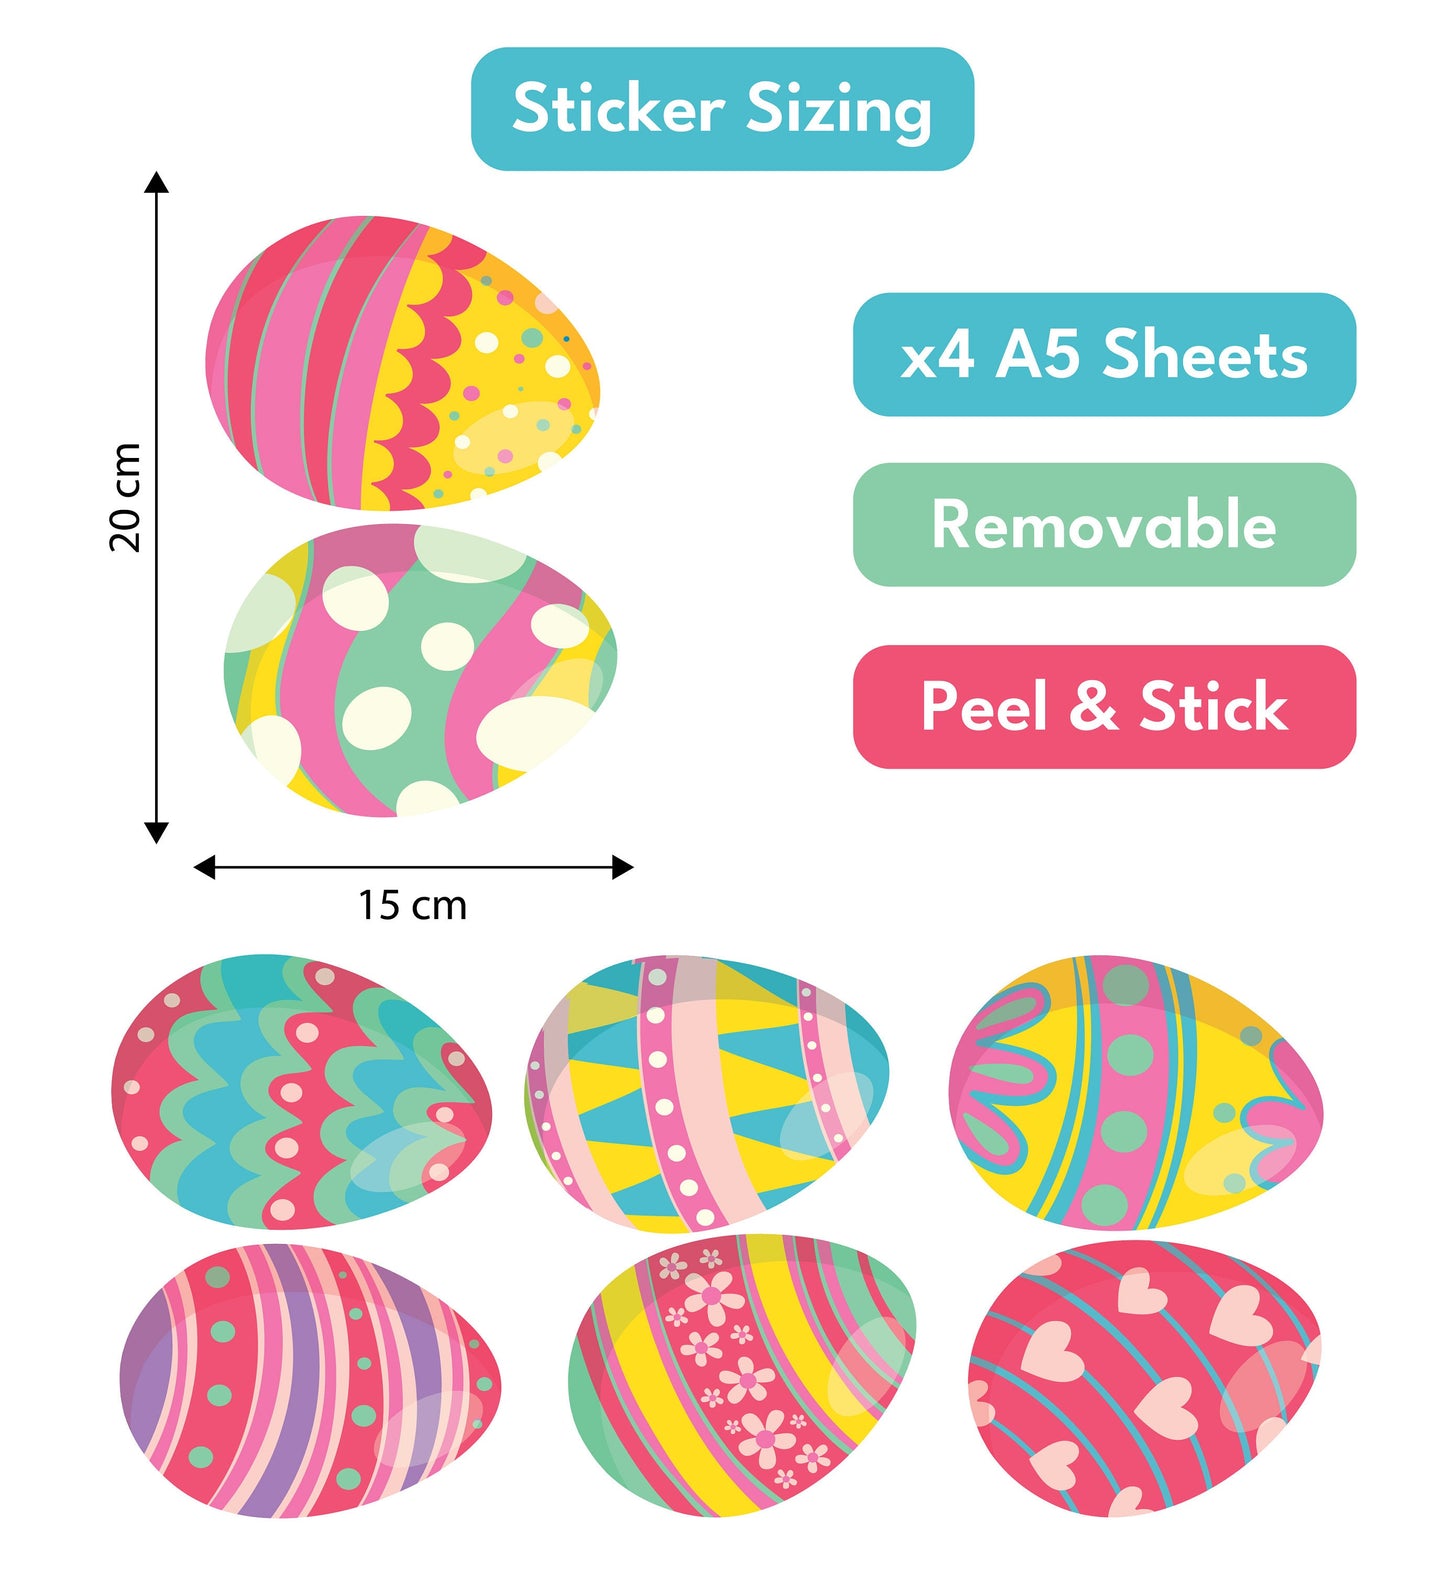 Cute Colourful Easter Eggs Window Stickers, Spring Window Decals Wall Art Kids Easter Decor